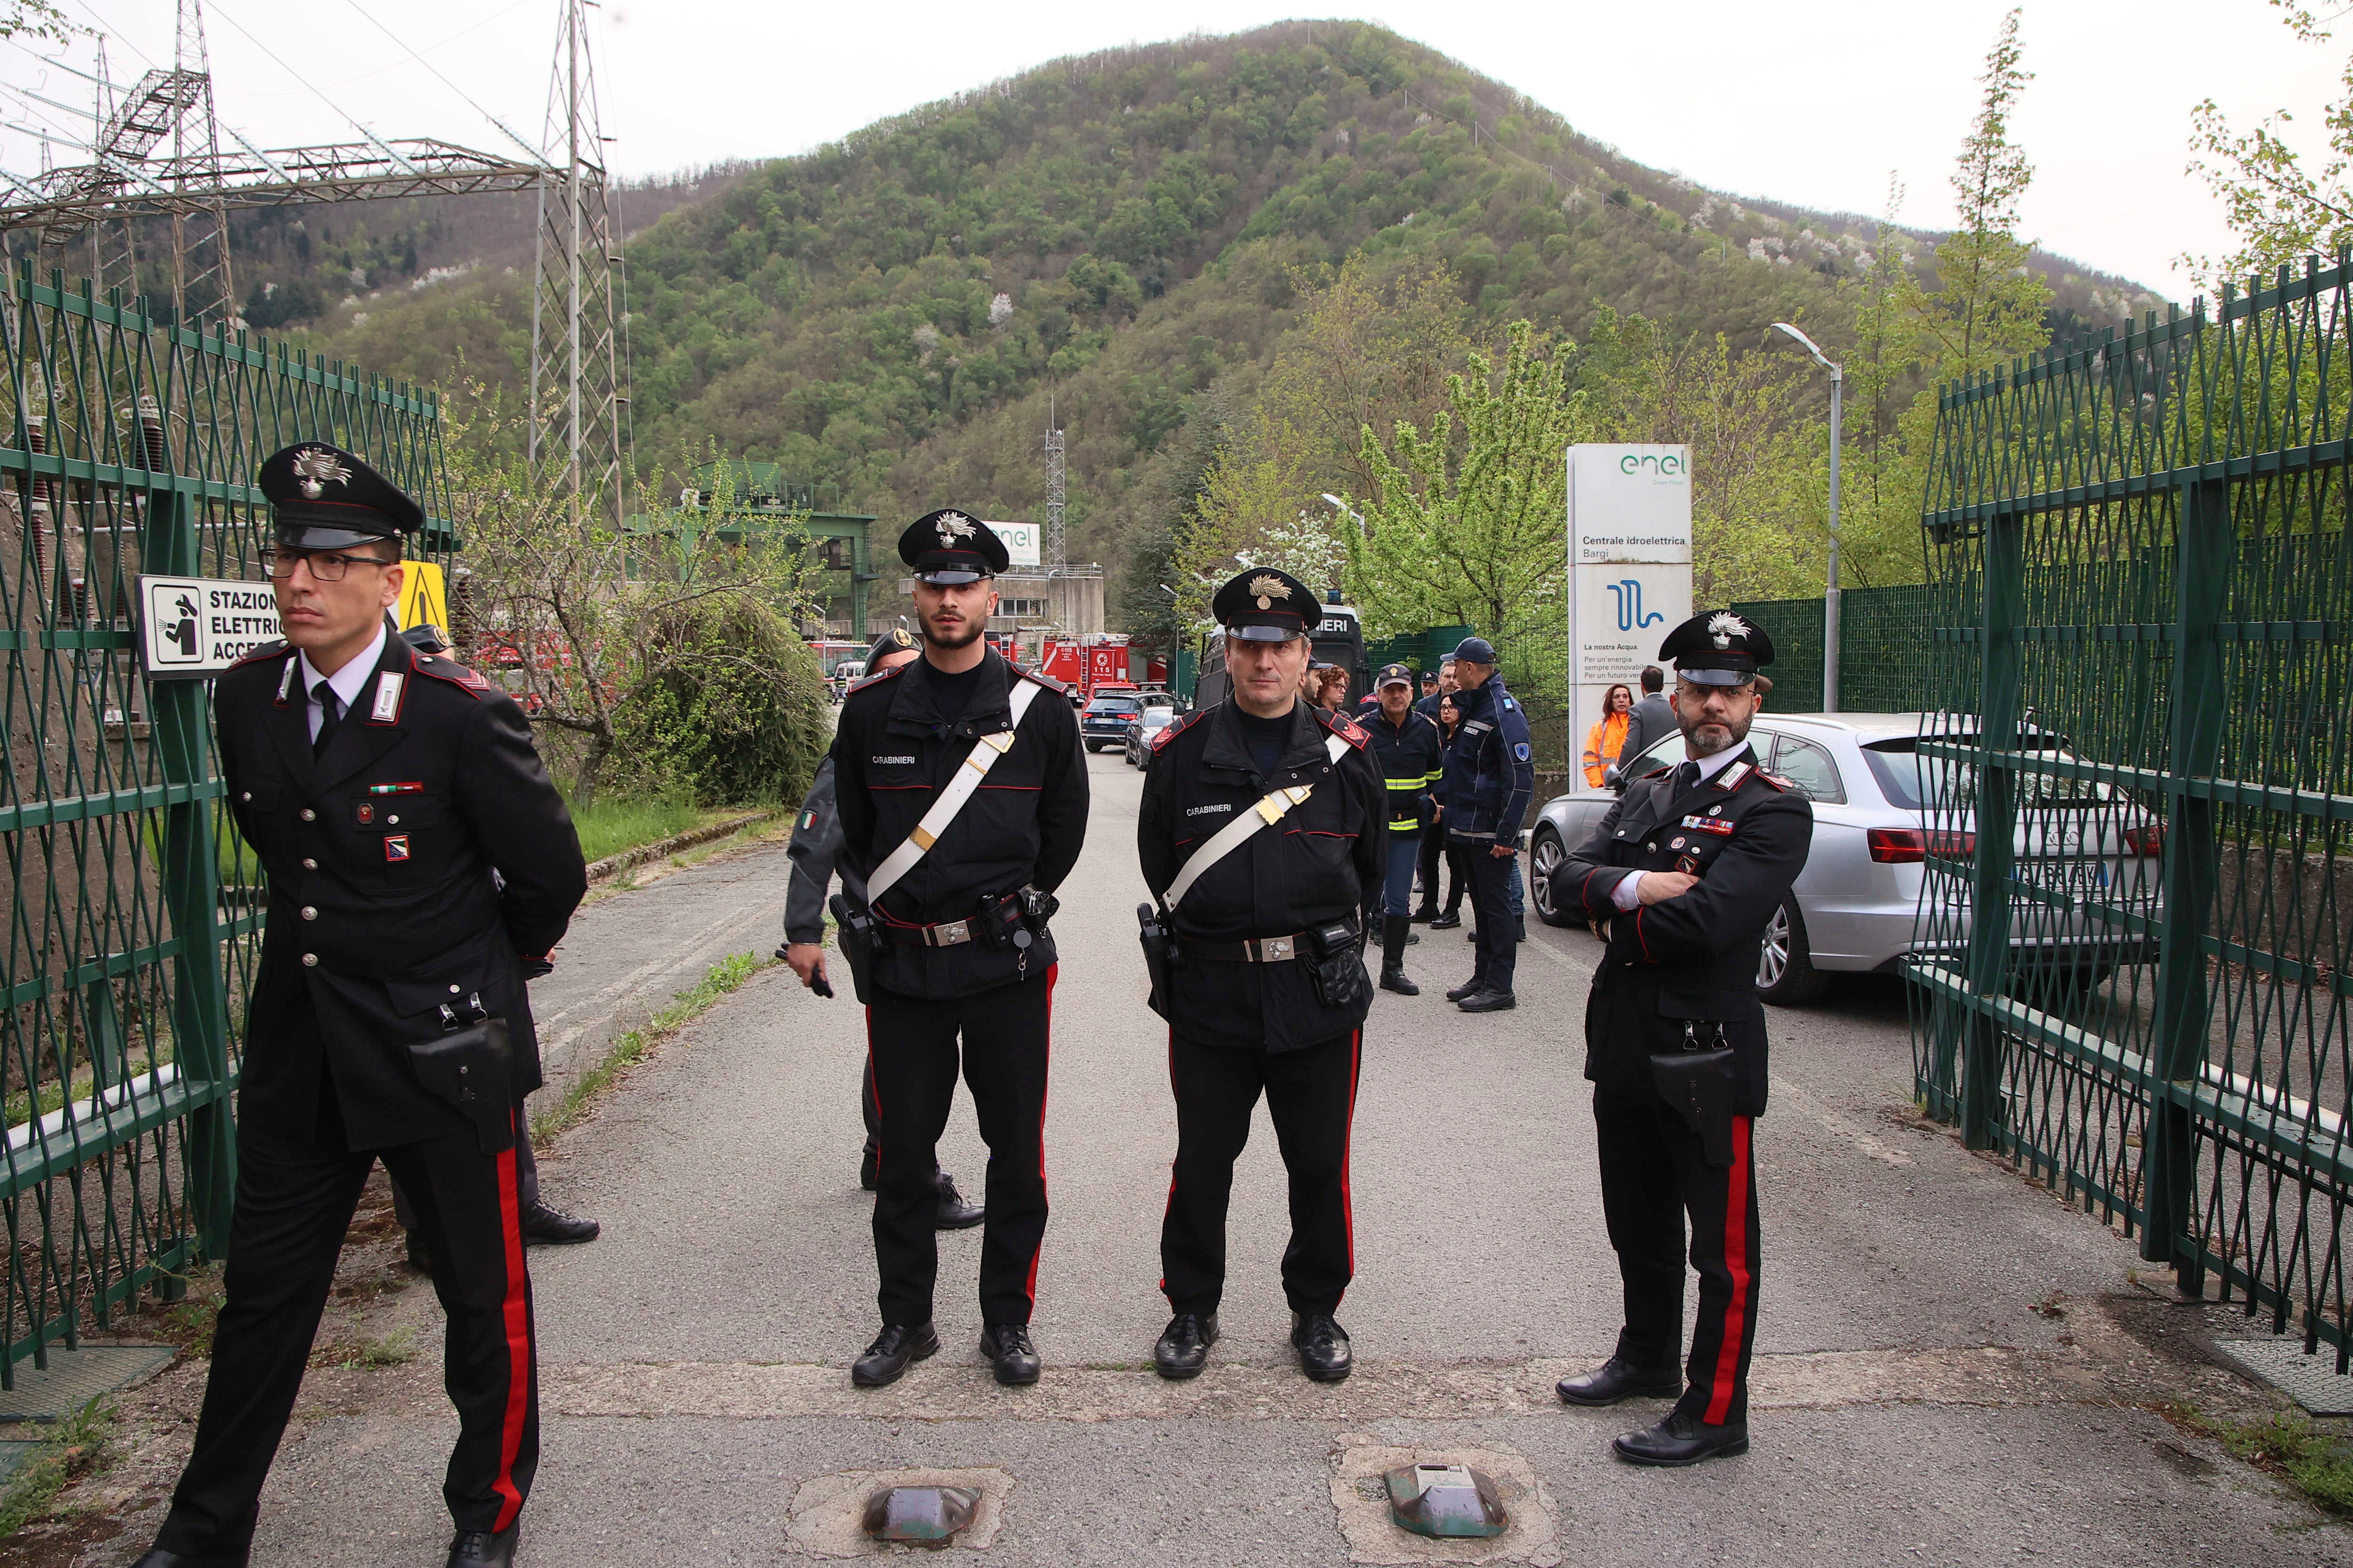 Carabinieri (Italian paramilitary police) officers on the site of an explosion occurred at the hydroelectric plant